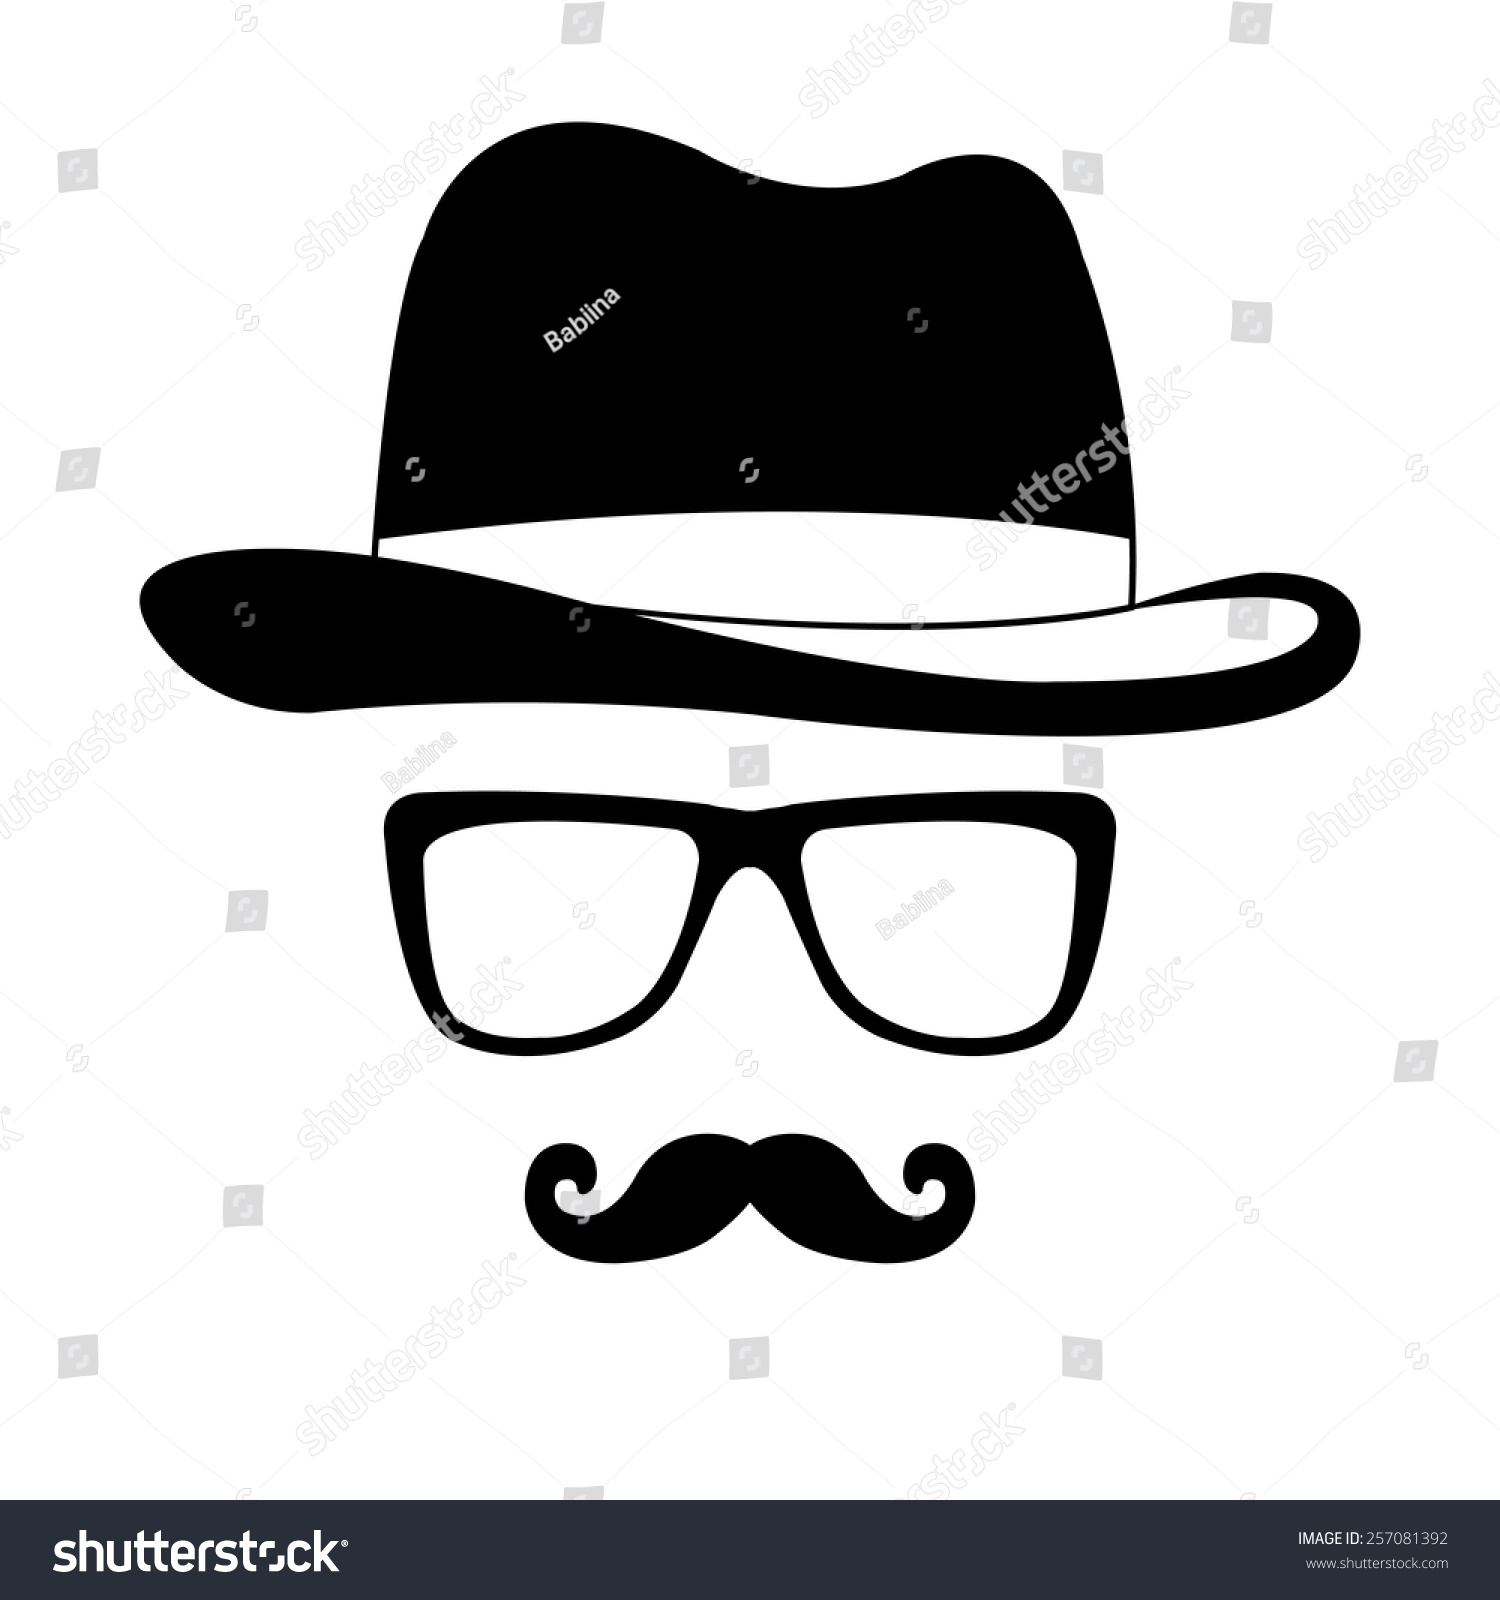 man with hat clipart - photo #47